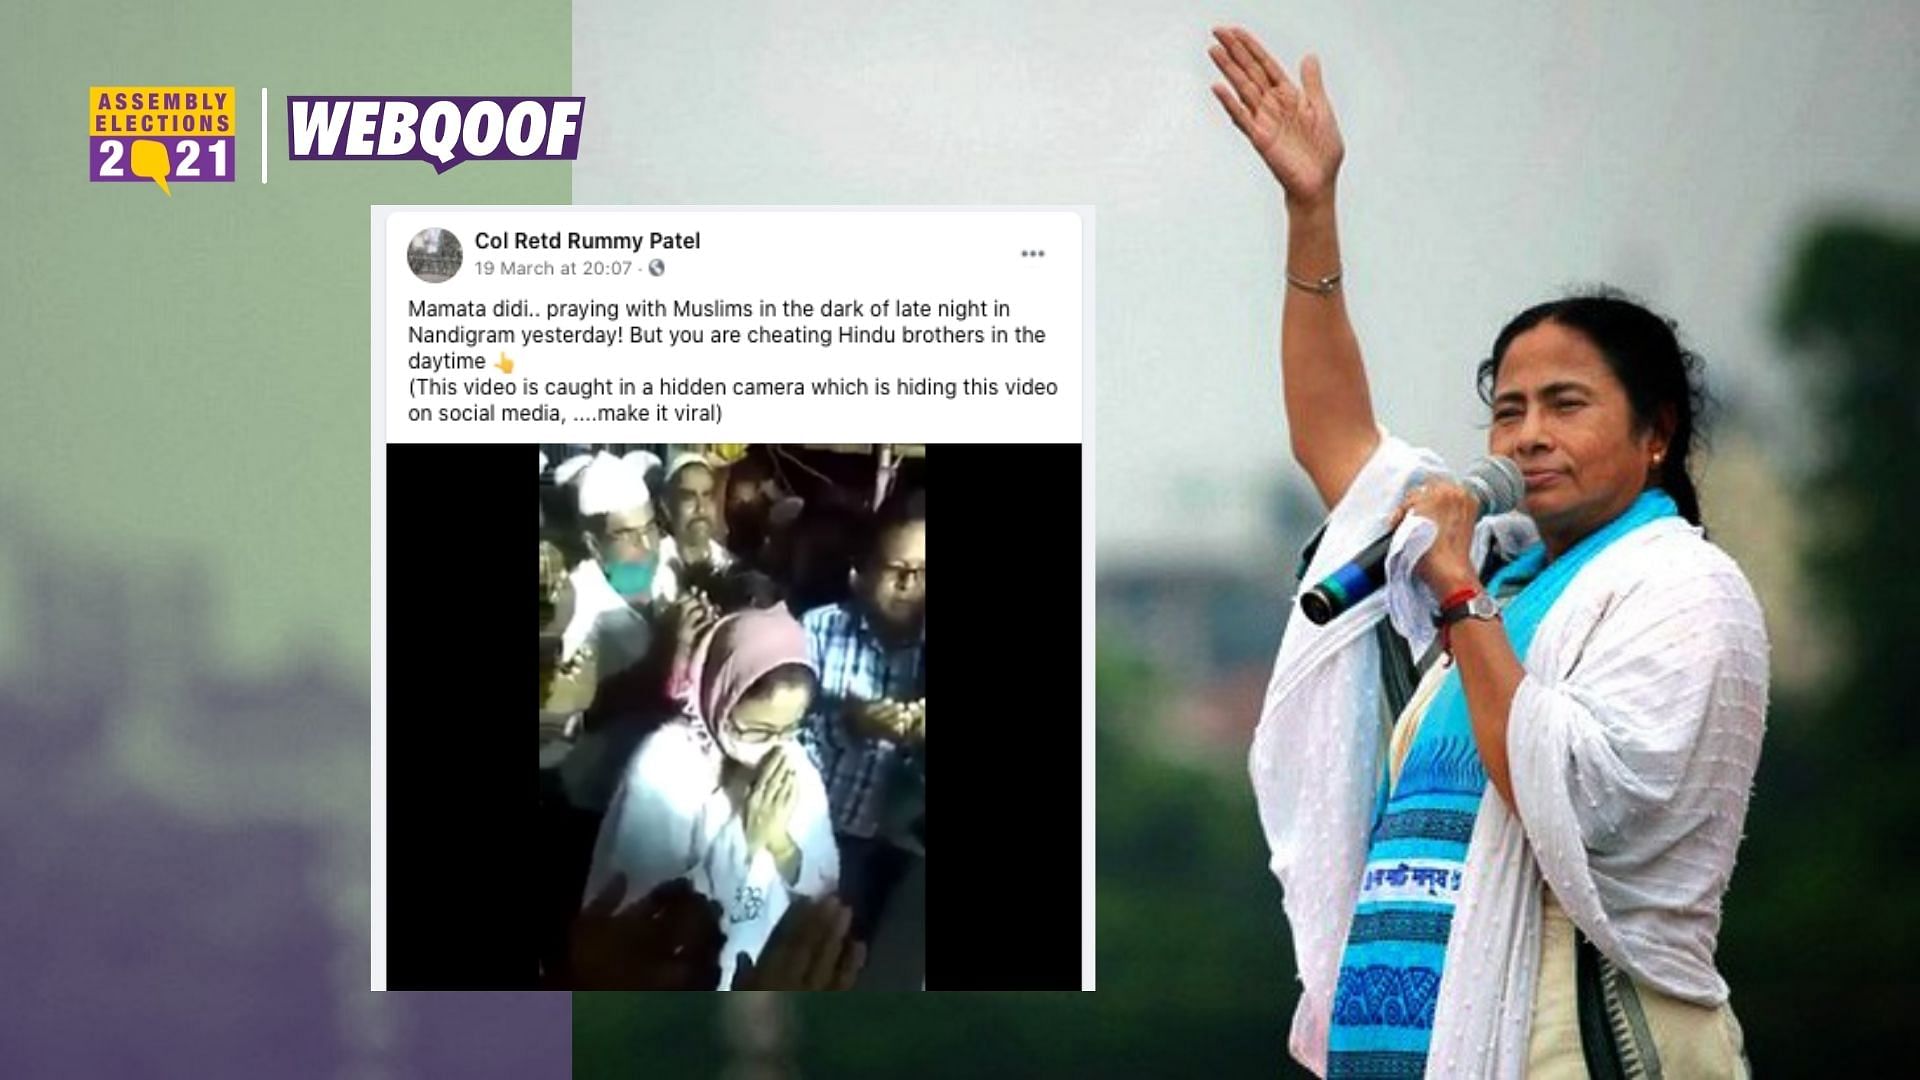 With the 2021 West Bengal election around the corner, a video of Mamata Banerjee offering prayers at a <i>mazar</i> is being shared on social media with a misleading claim.